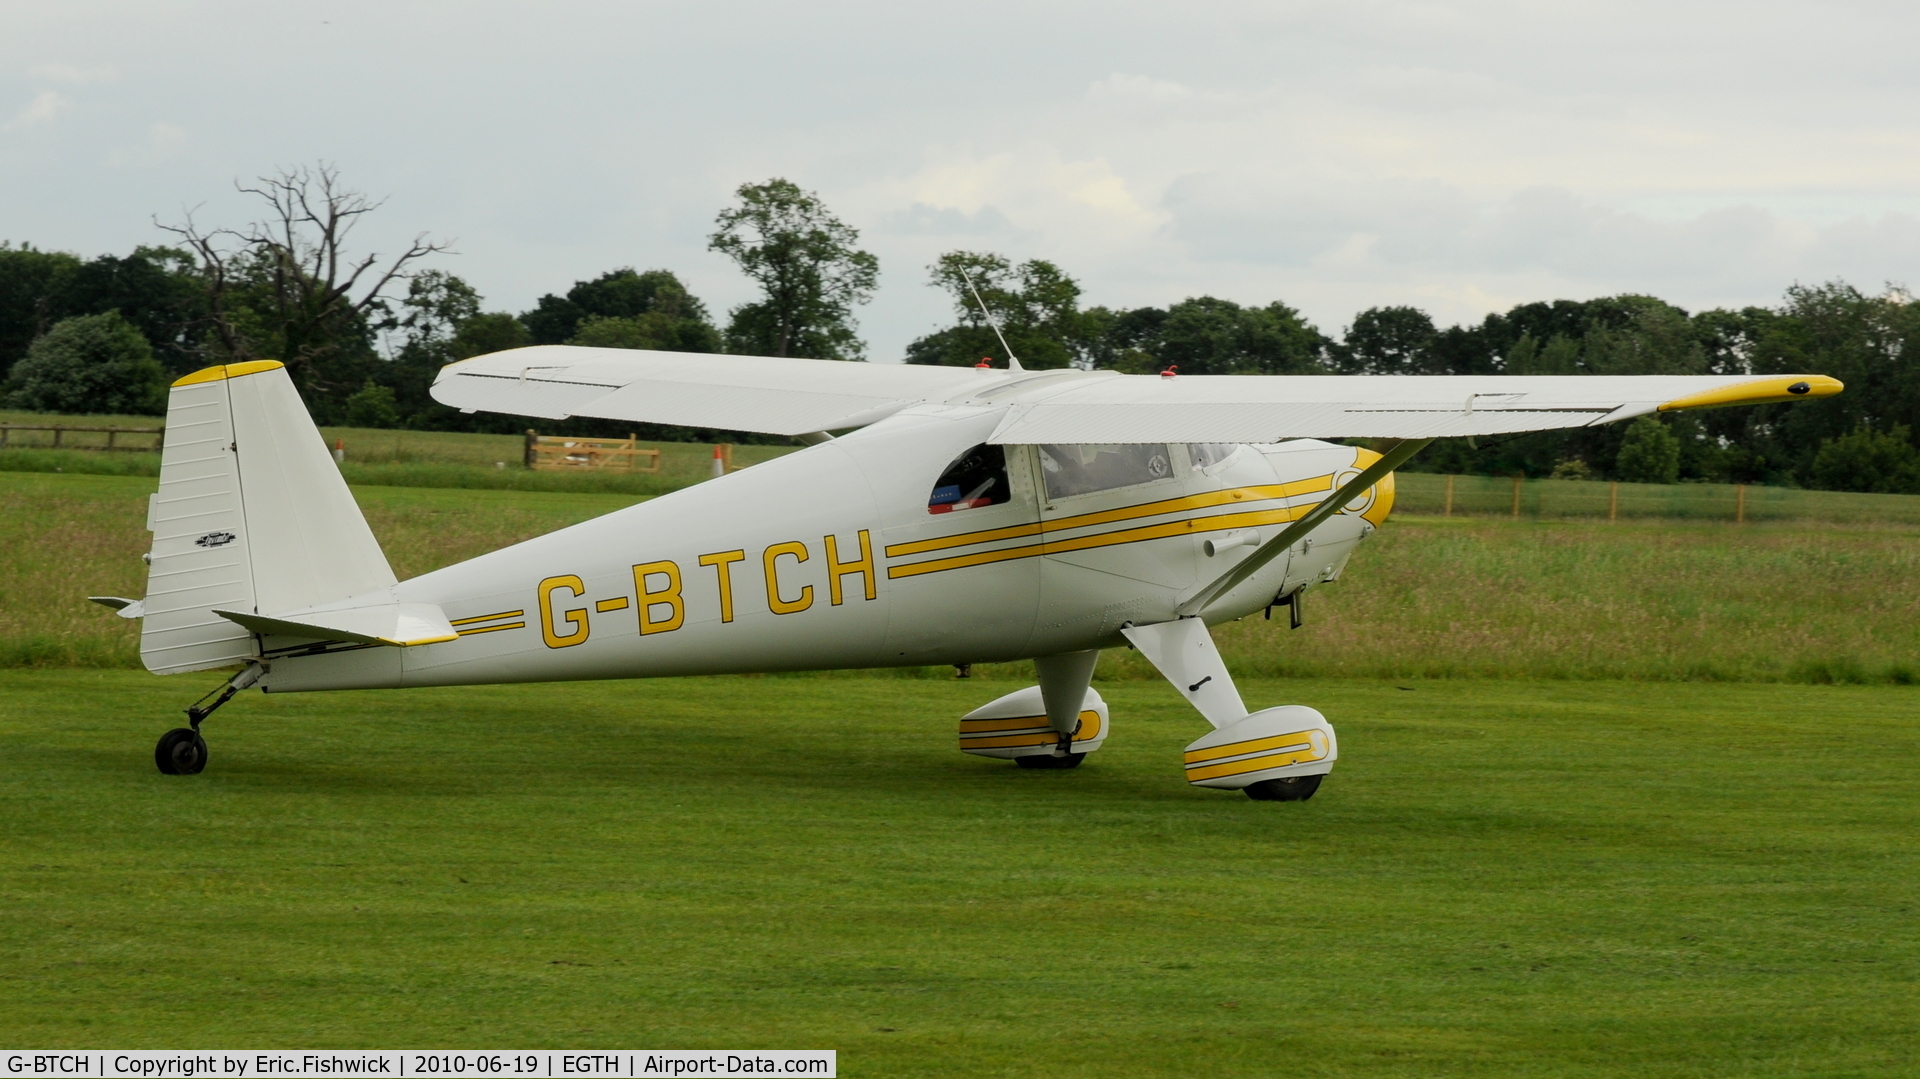 G-BTCH, 1948 Luscombe 8E Silvaire C/N 6403, 2. G-BTCH at Shuttleworth Collection Evening Air Display & LAA Party in the Park June 2010